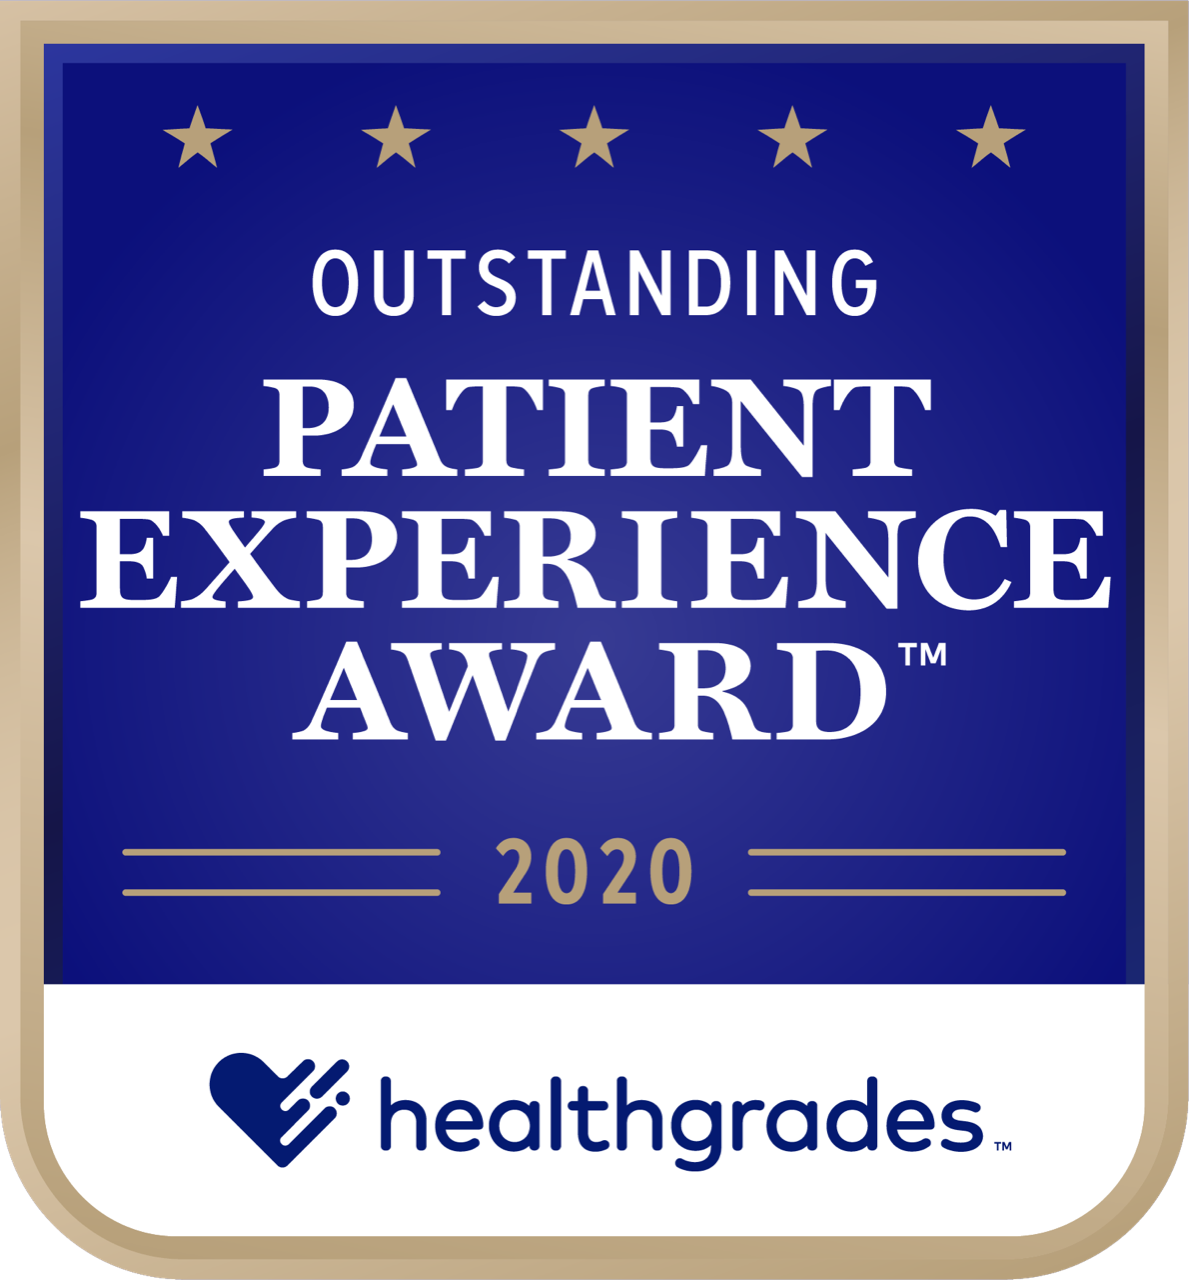 HG_Outstanding_Patient_Experience_Award_Image_2020.PNG